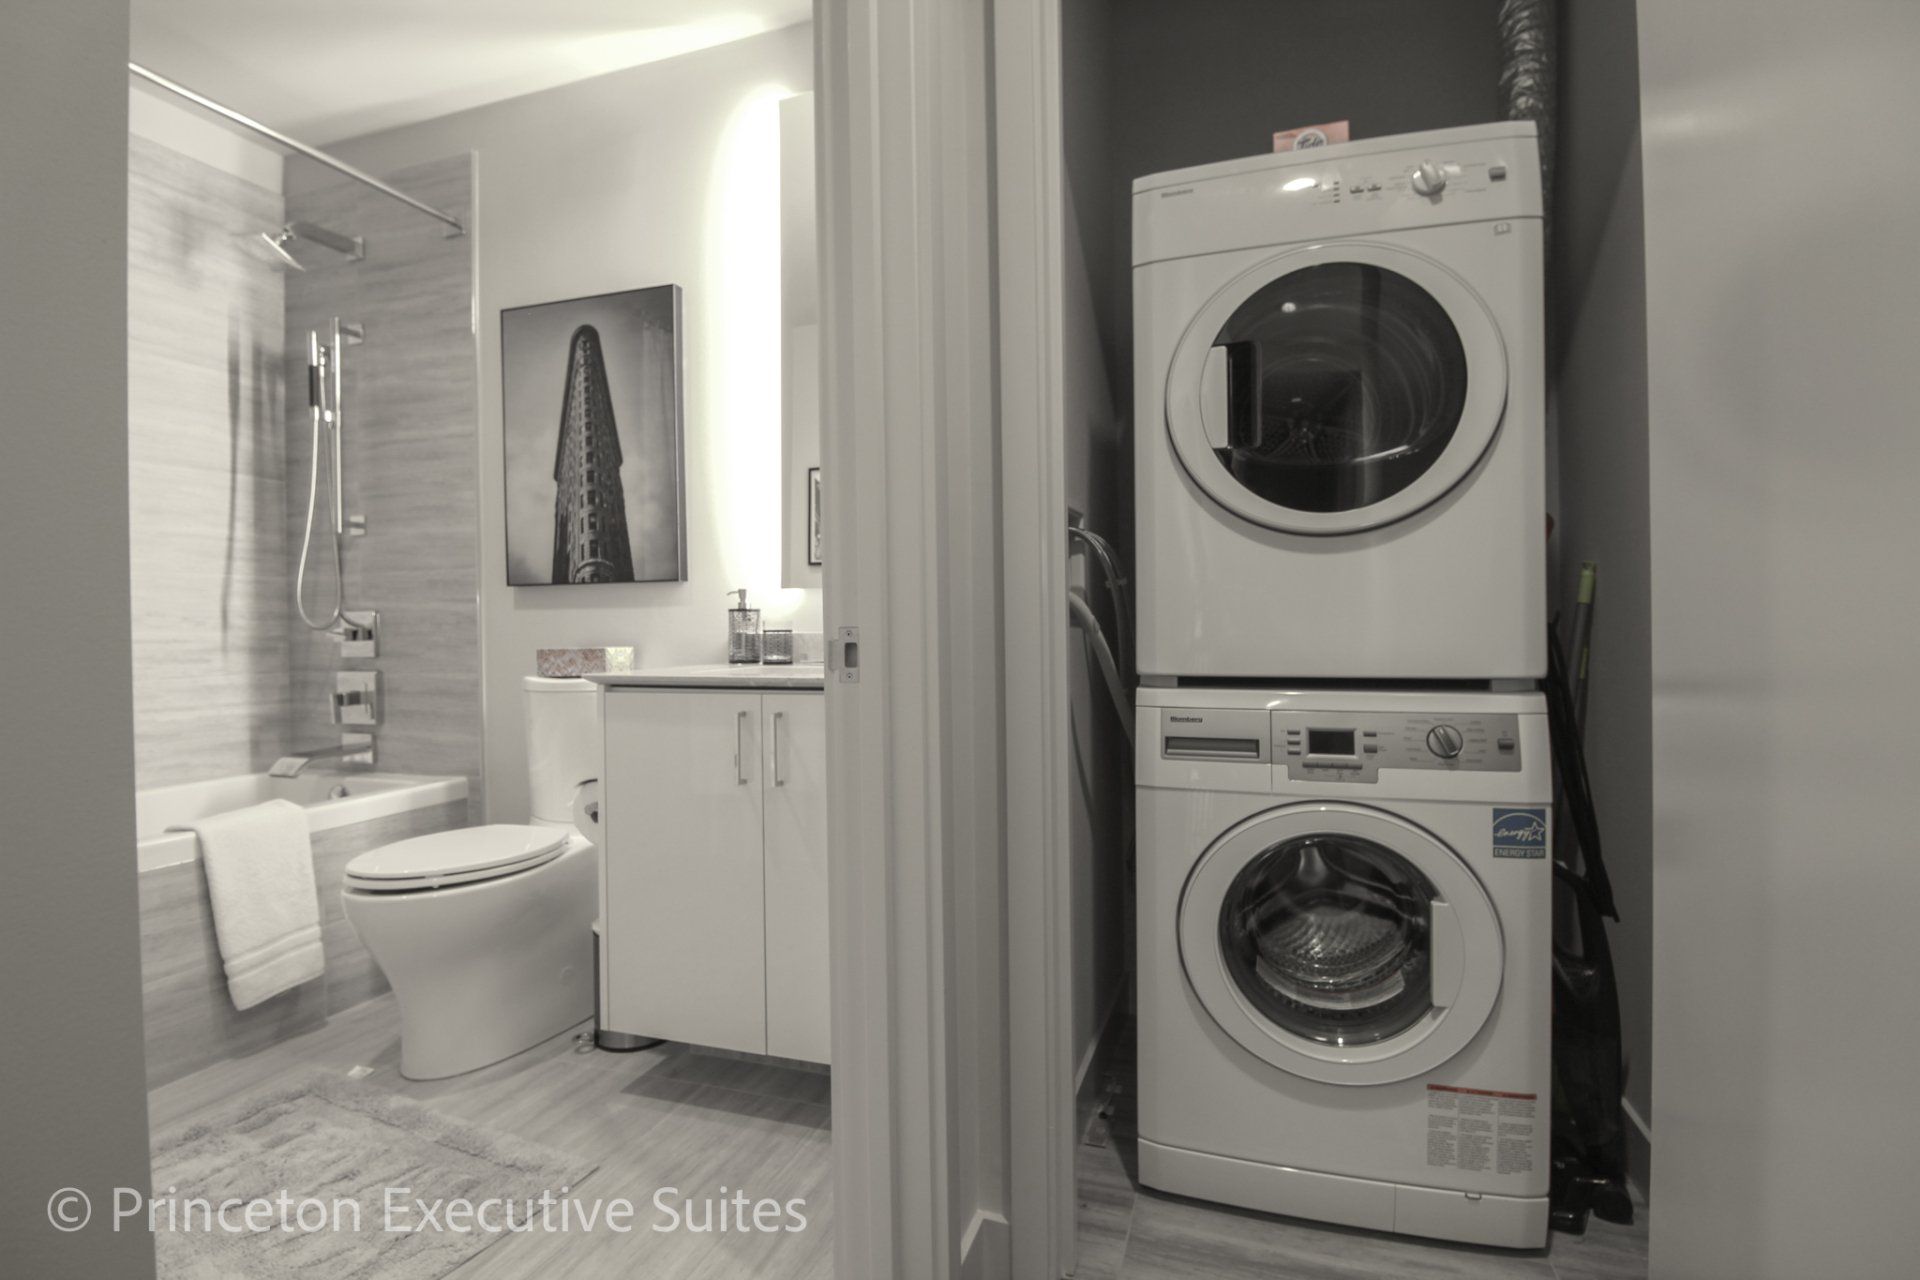 In Suite laundry with state of the art stackable washing machine in a closet next to the modern bathroom